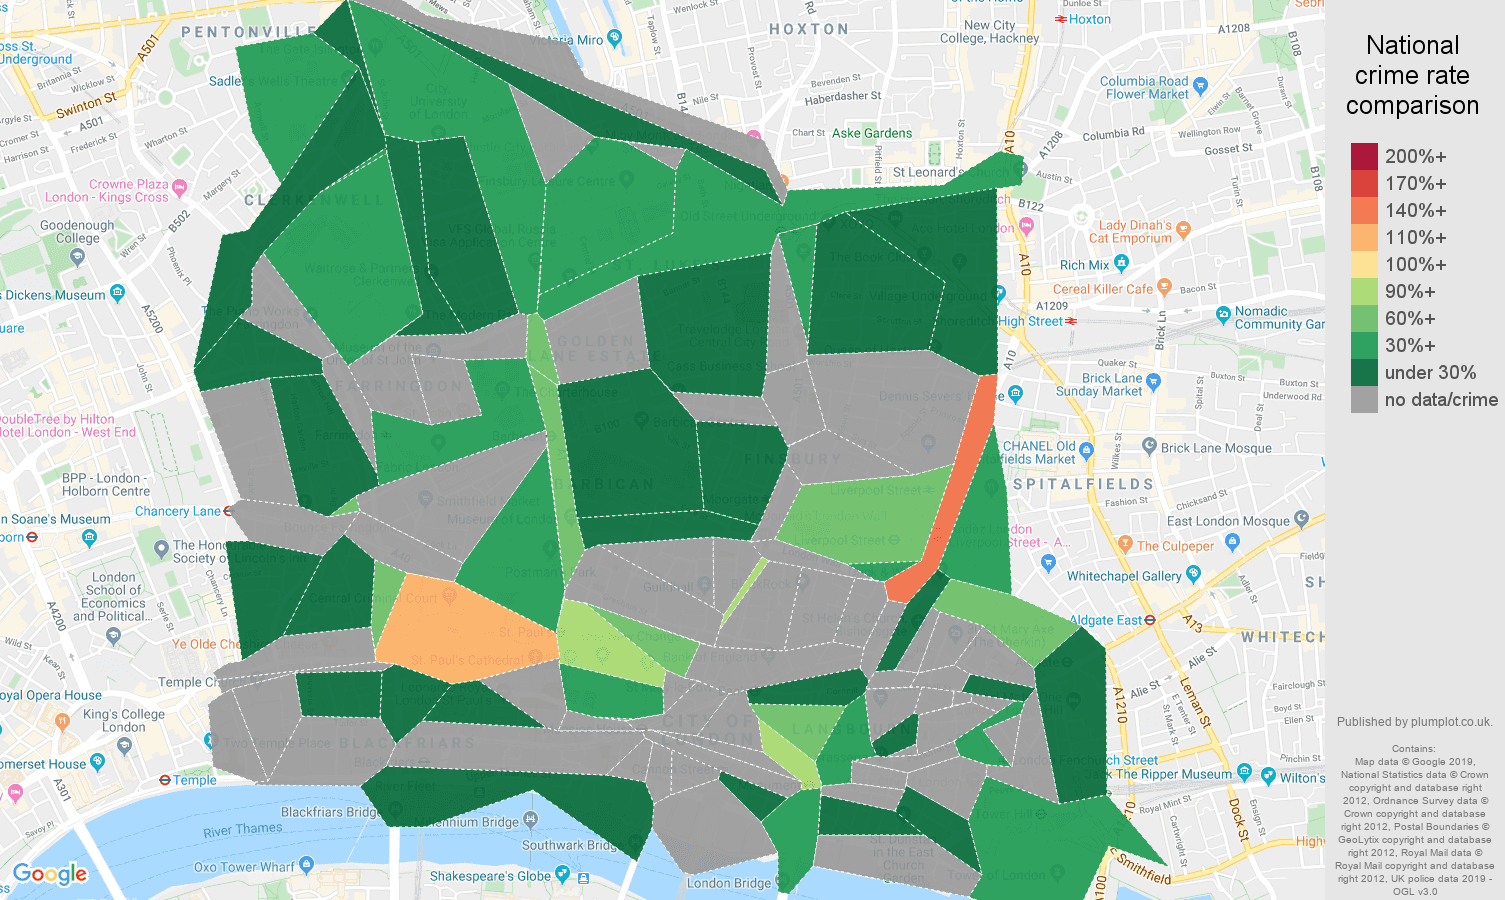 East Central London other crime rate comparison map